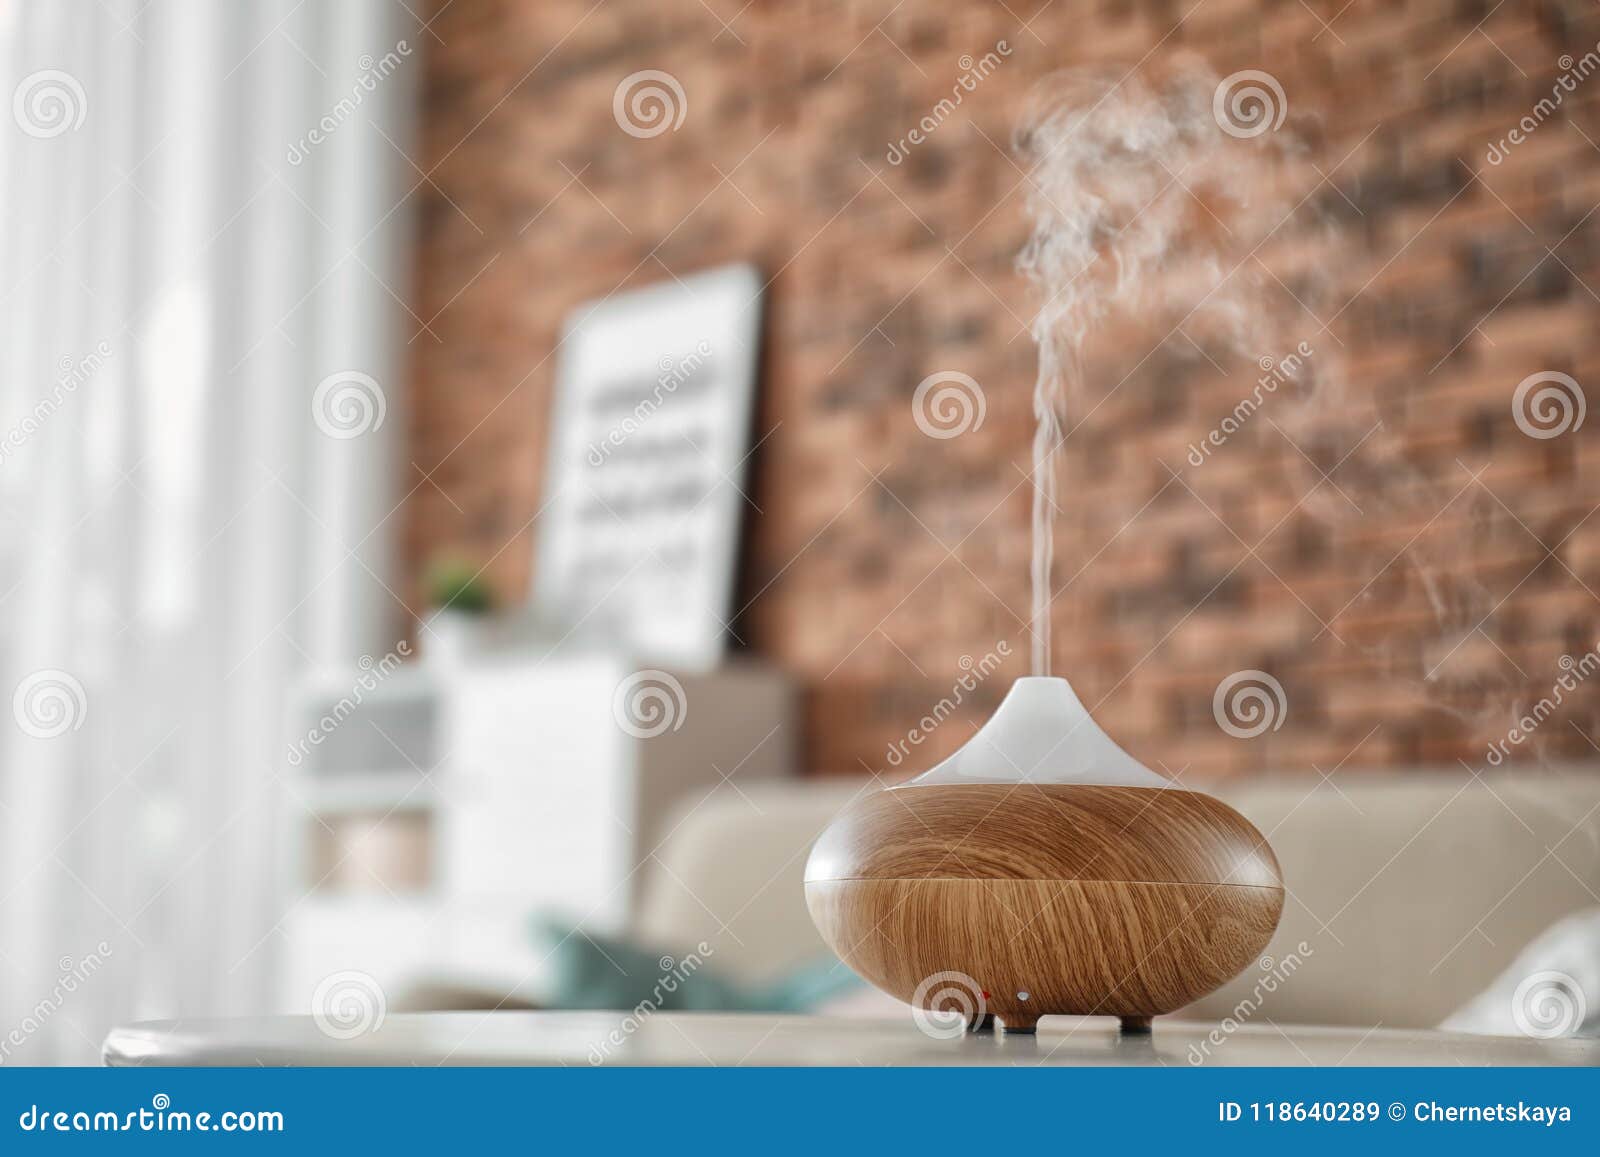 aroma oil diffuser on table at home